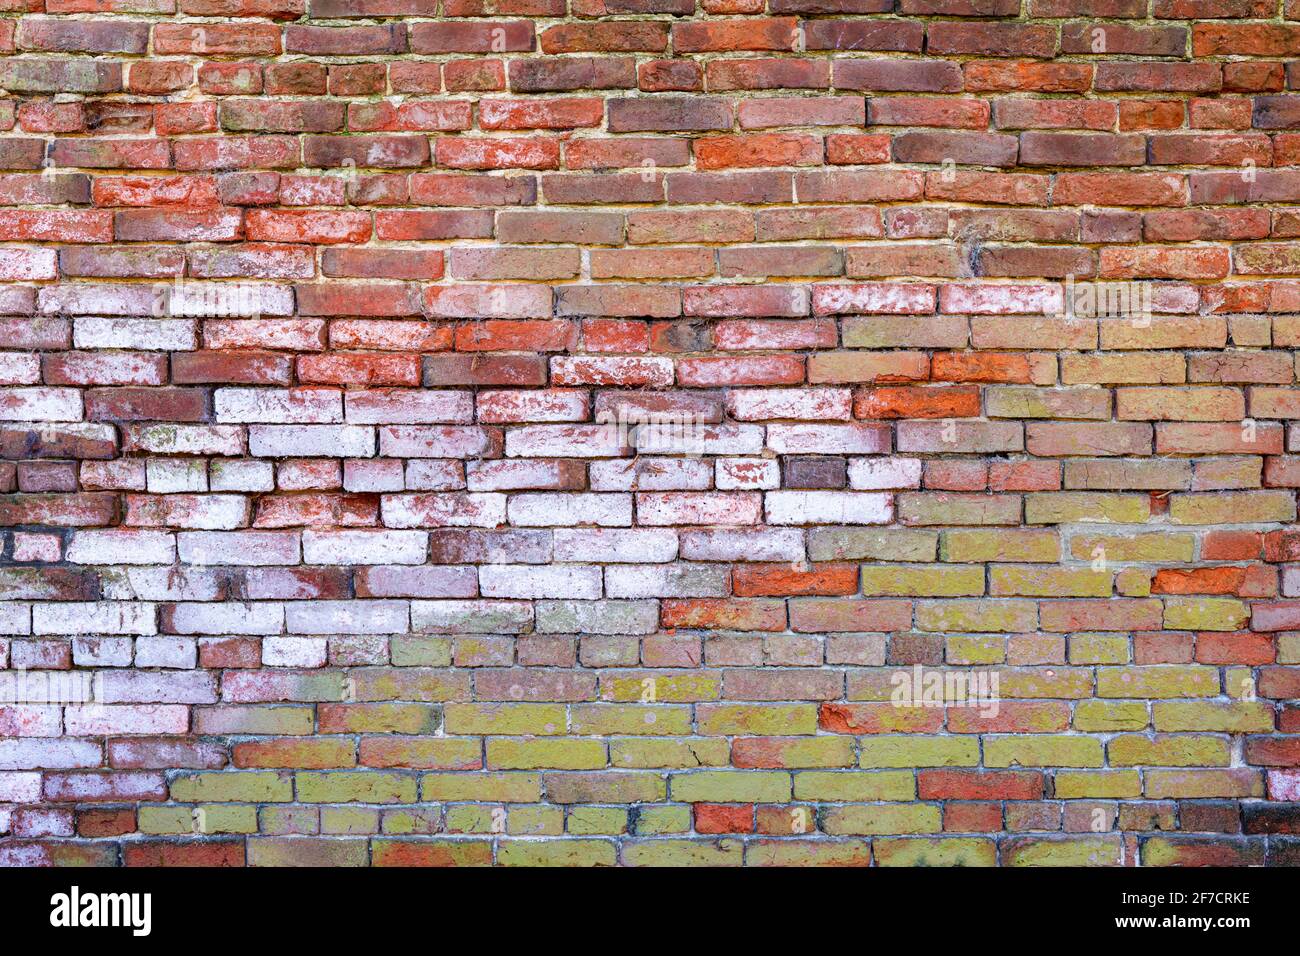 multicoloured Brick wall background variety of bricks brick wall made with  old reclaimed bricks High resolution high quality photo Stock Photo - Alamy